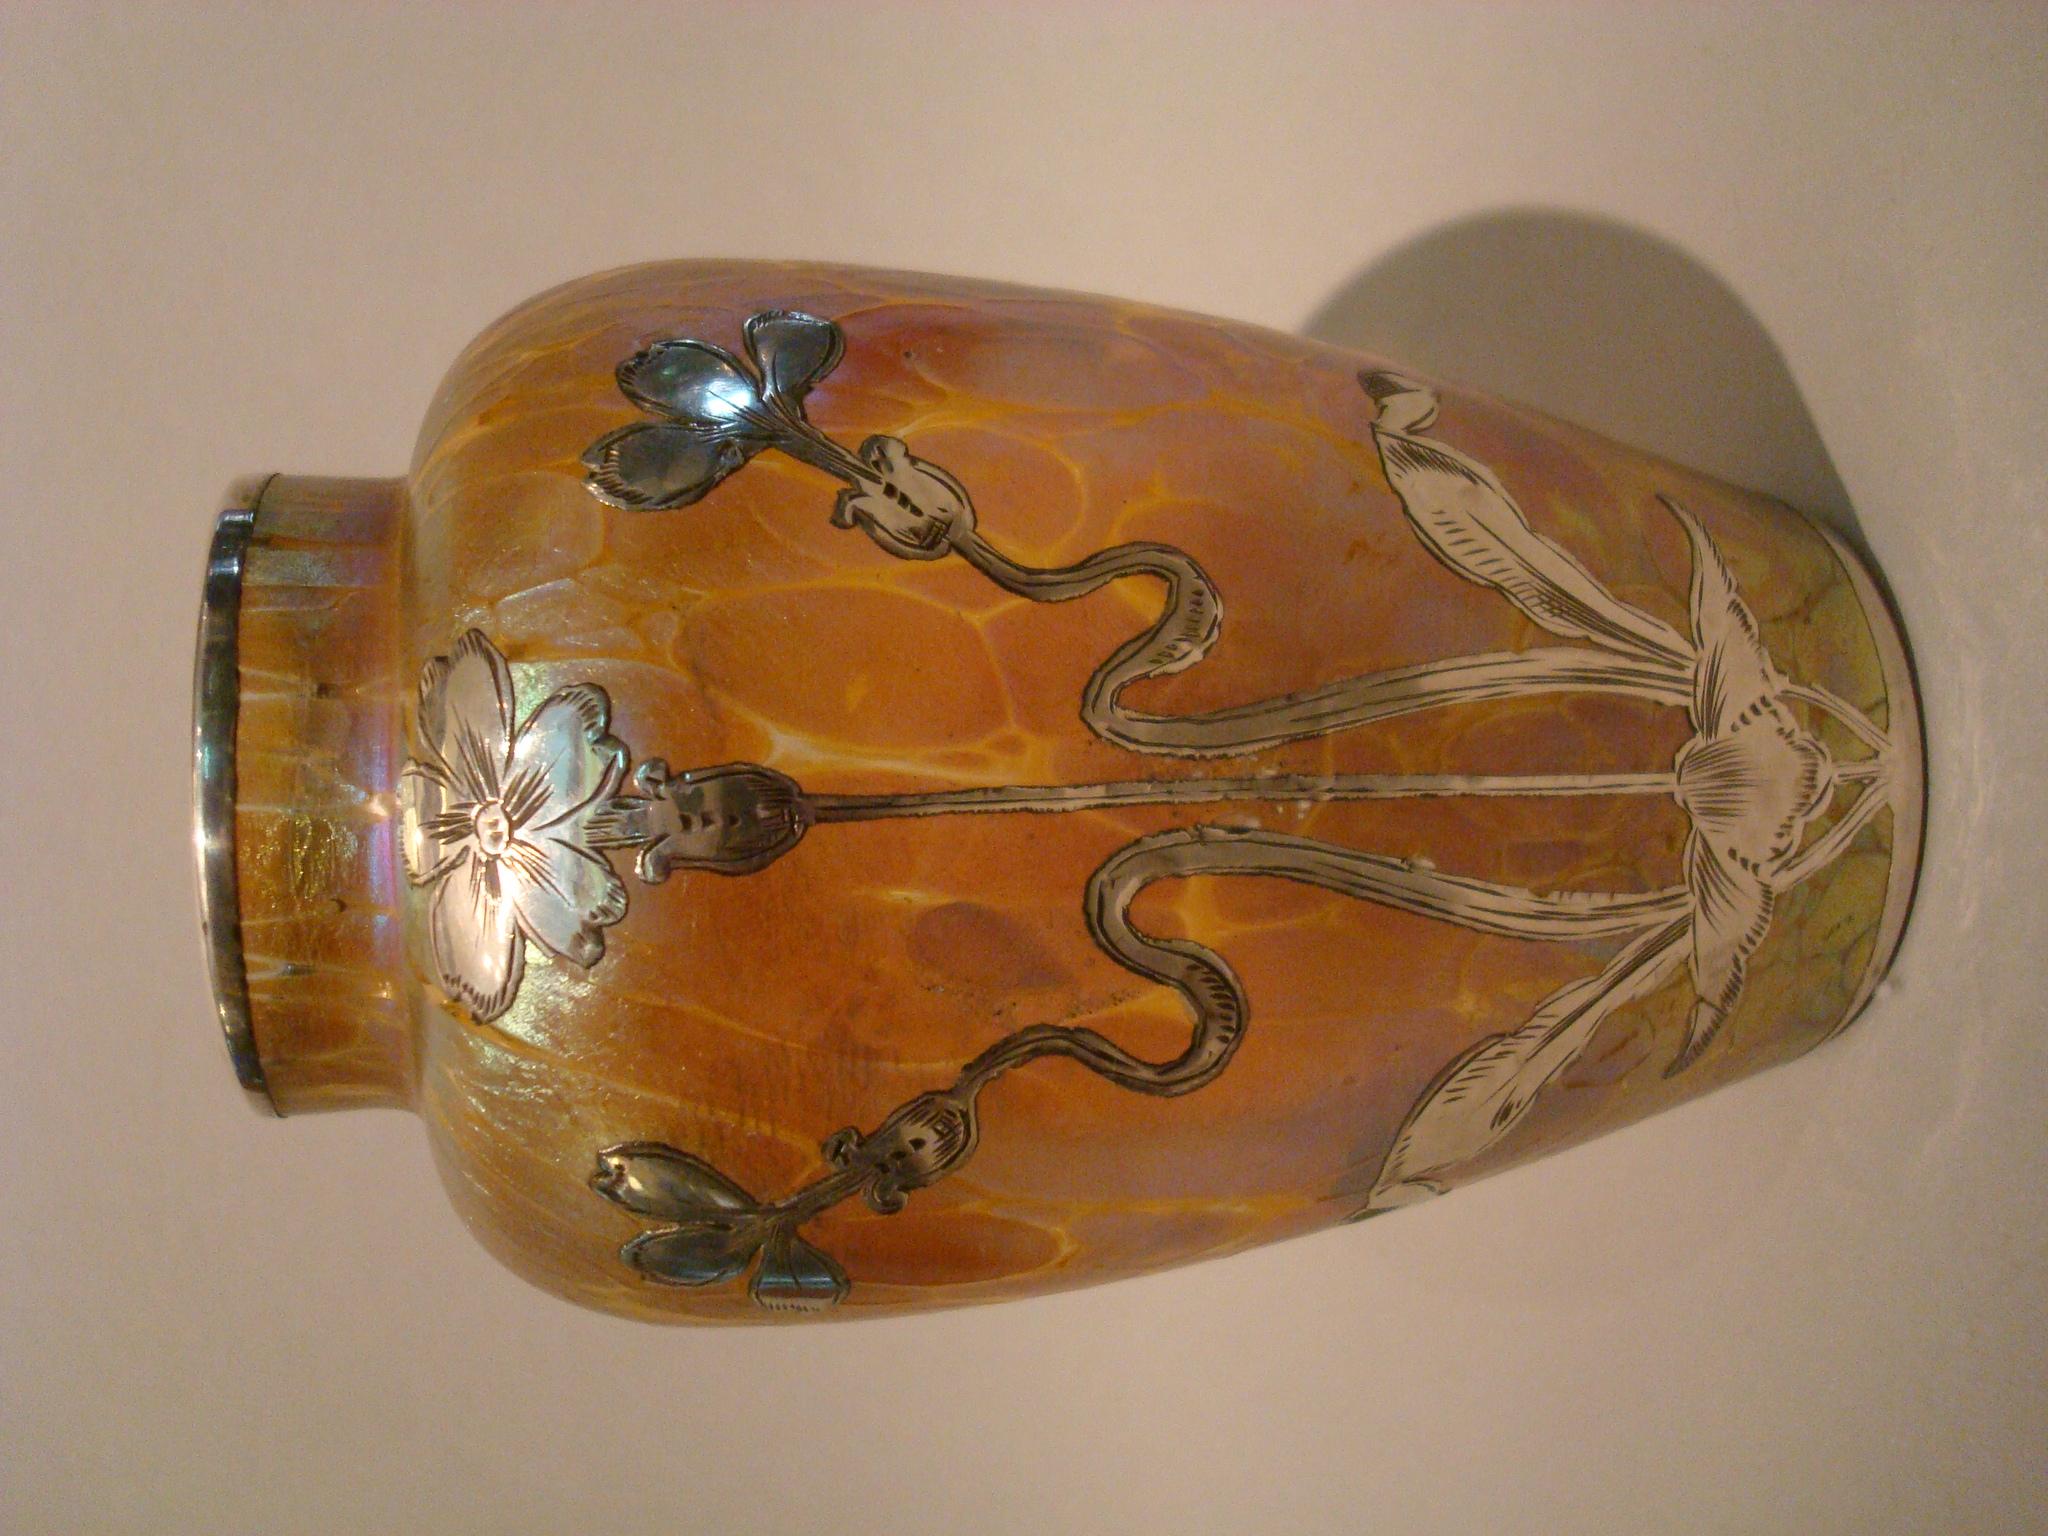 20th Century Art Nouveau Loetz Iridescent Glass Vase with Silver Overlay For Sale